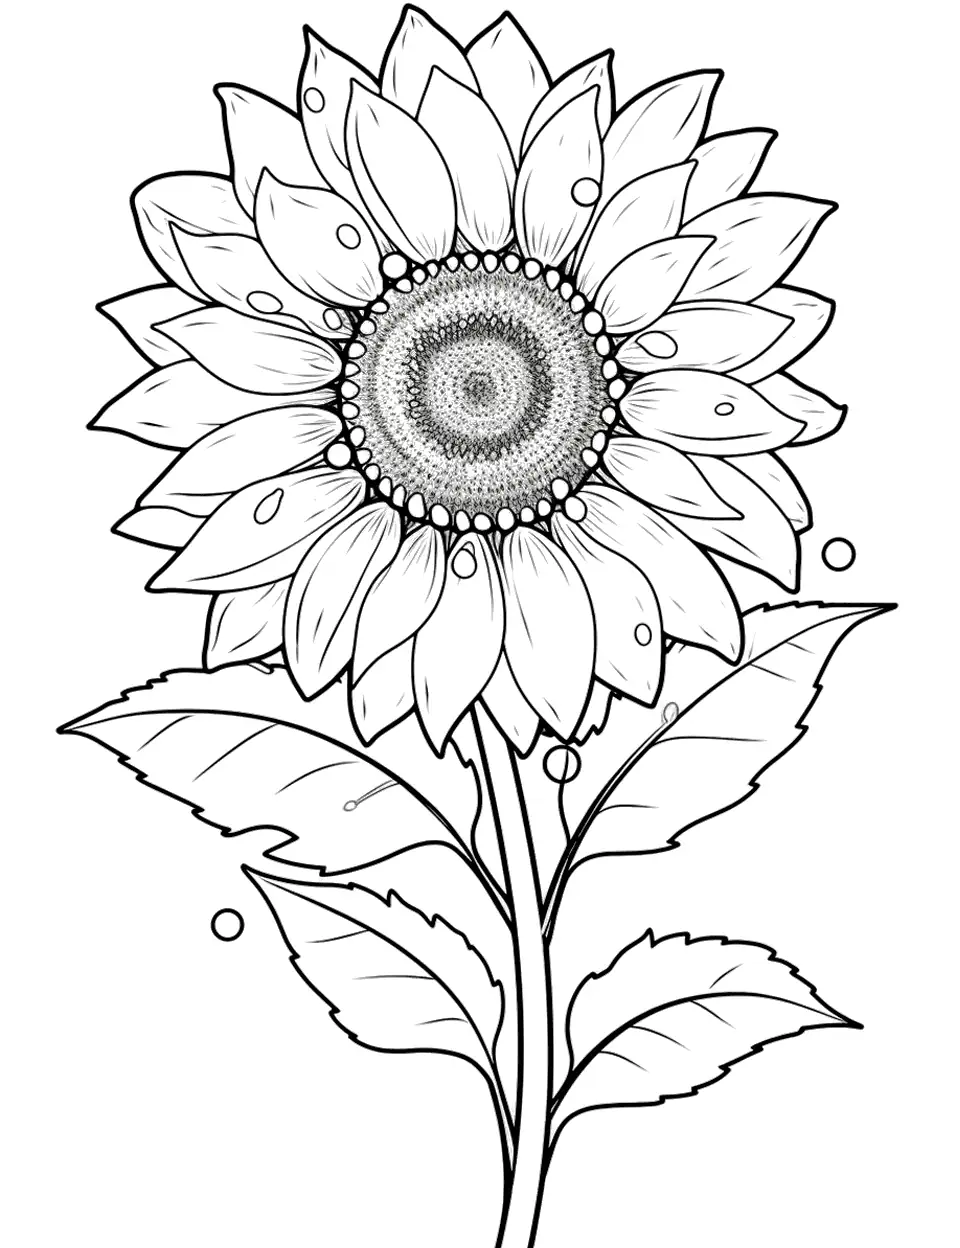 Sunflower with Dew Drops Coloring Page - A sunflower with spring morning dew drops on its petals.